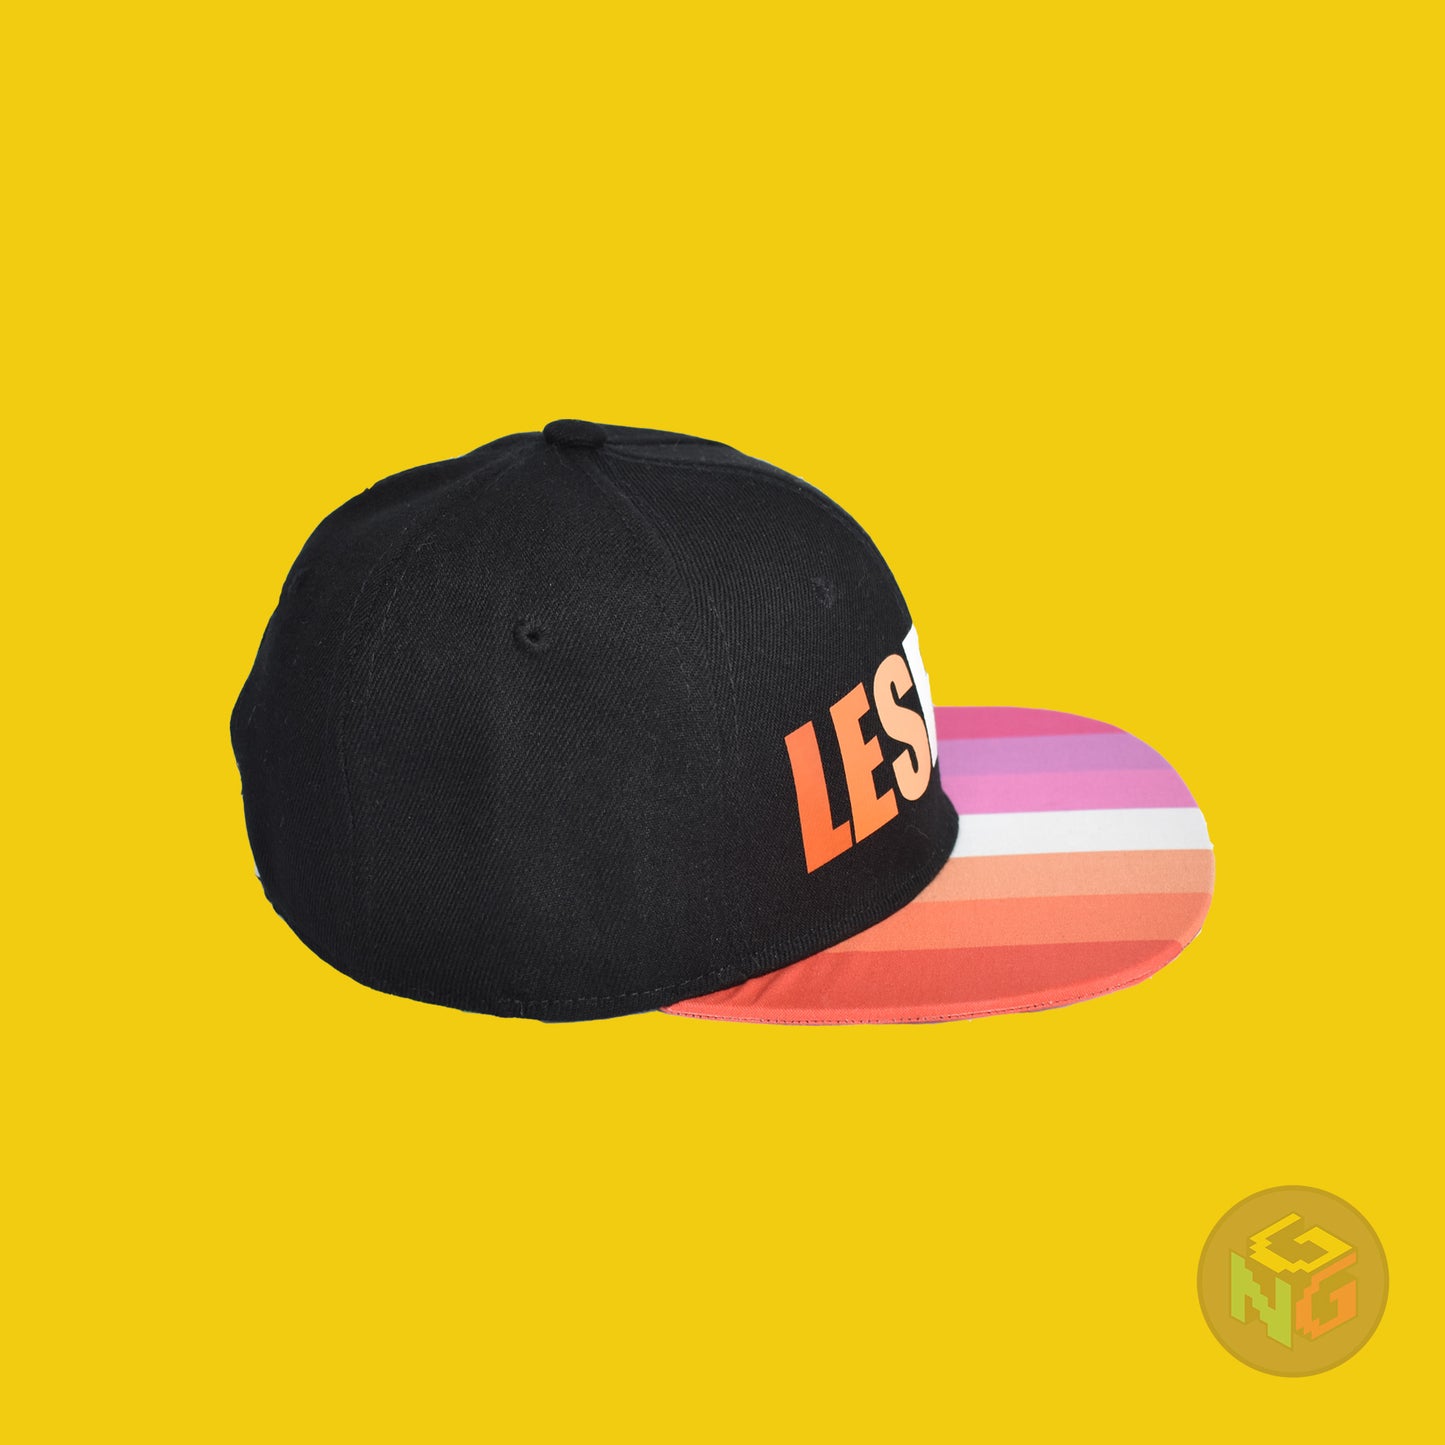 Black flat bill snapback hat. The brim has the lesbian pride flag on both sides and the front of the hat has the word “LESBIAN” in orange, pink, and white letters. Right view